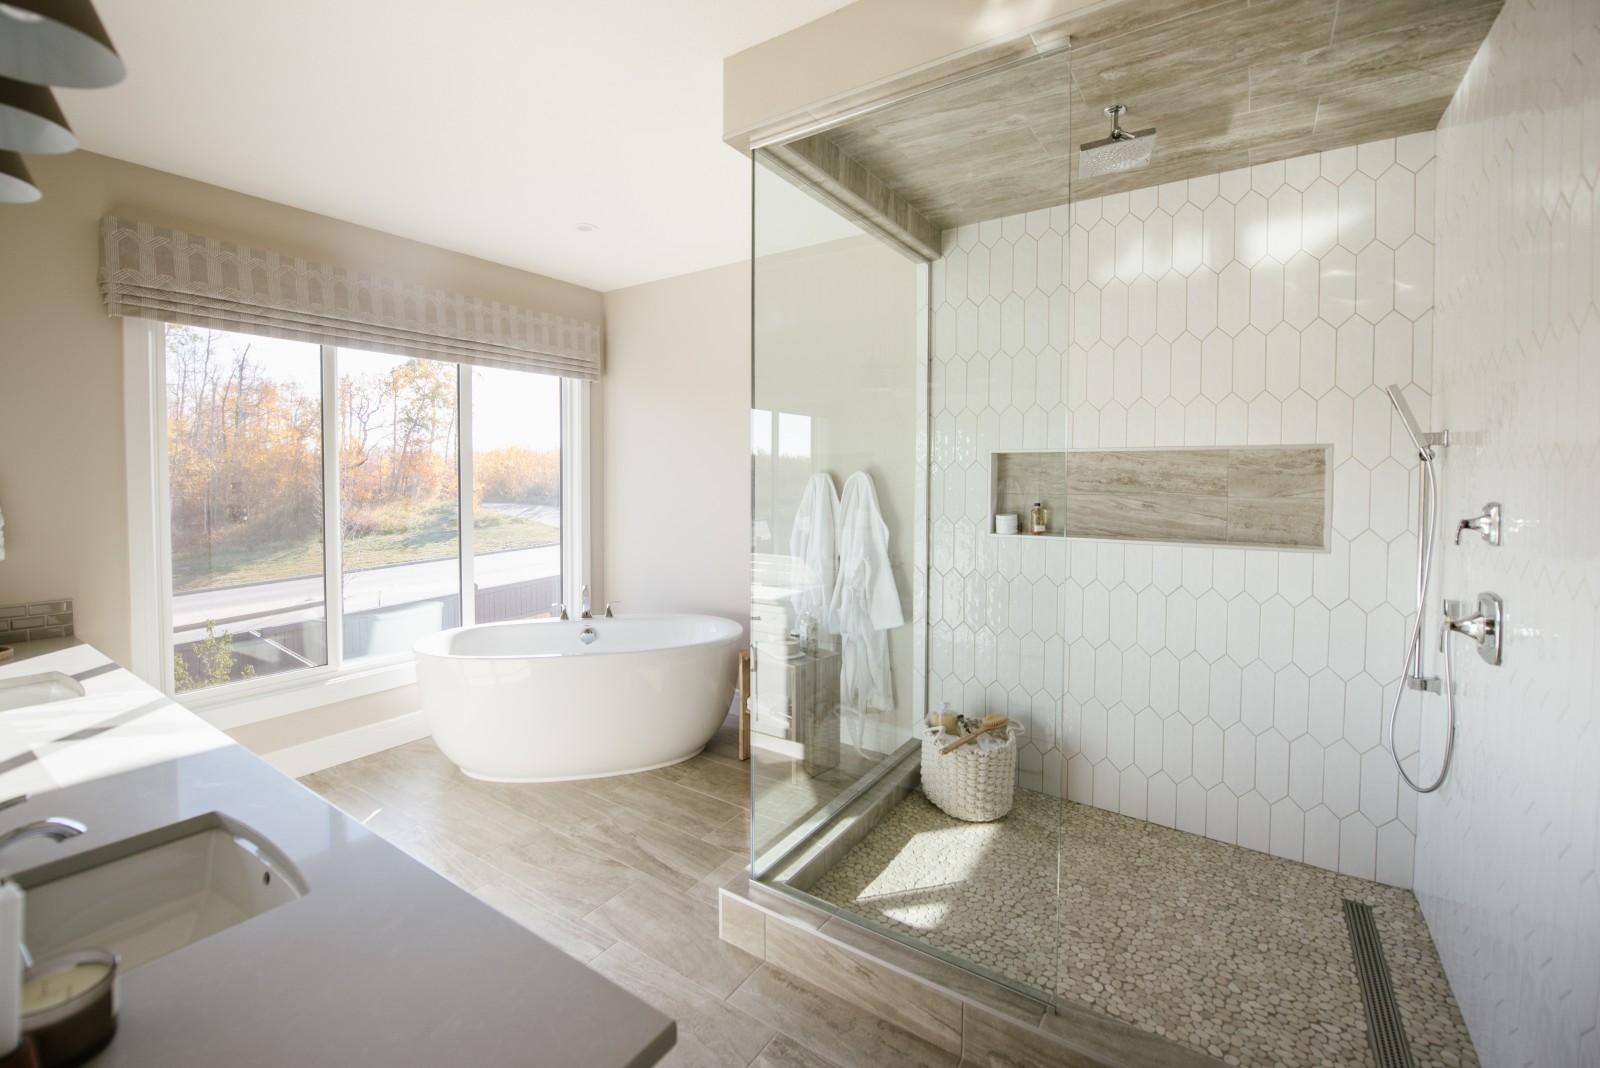 A bright master ensuite featuring a fully tiled shower with large niche and free standing tub in front of large windows